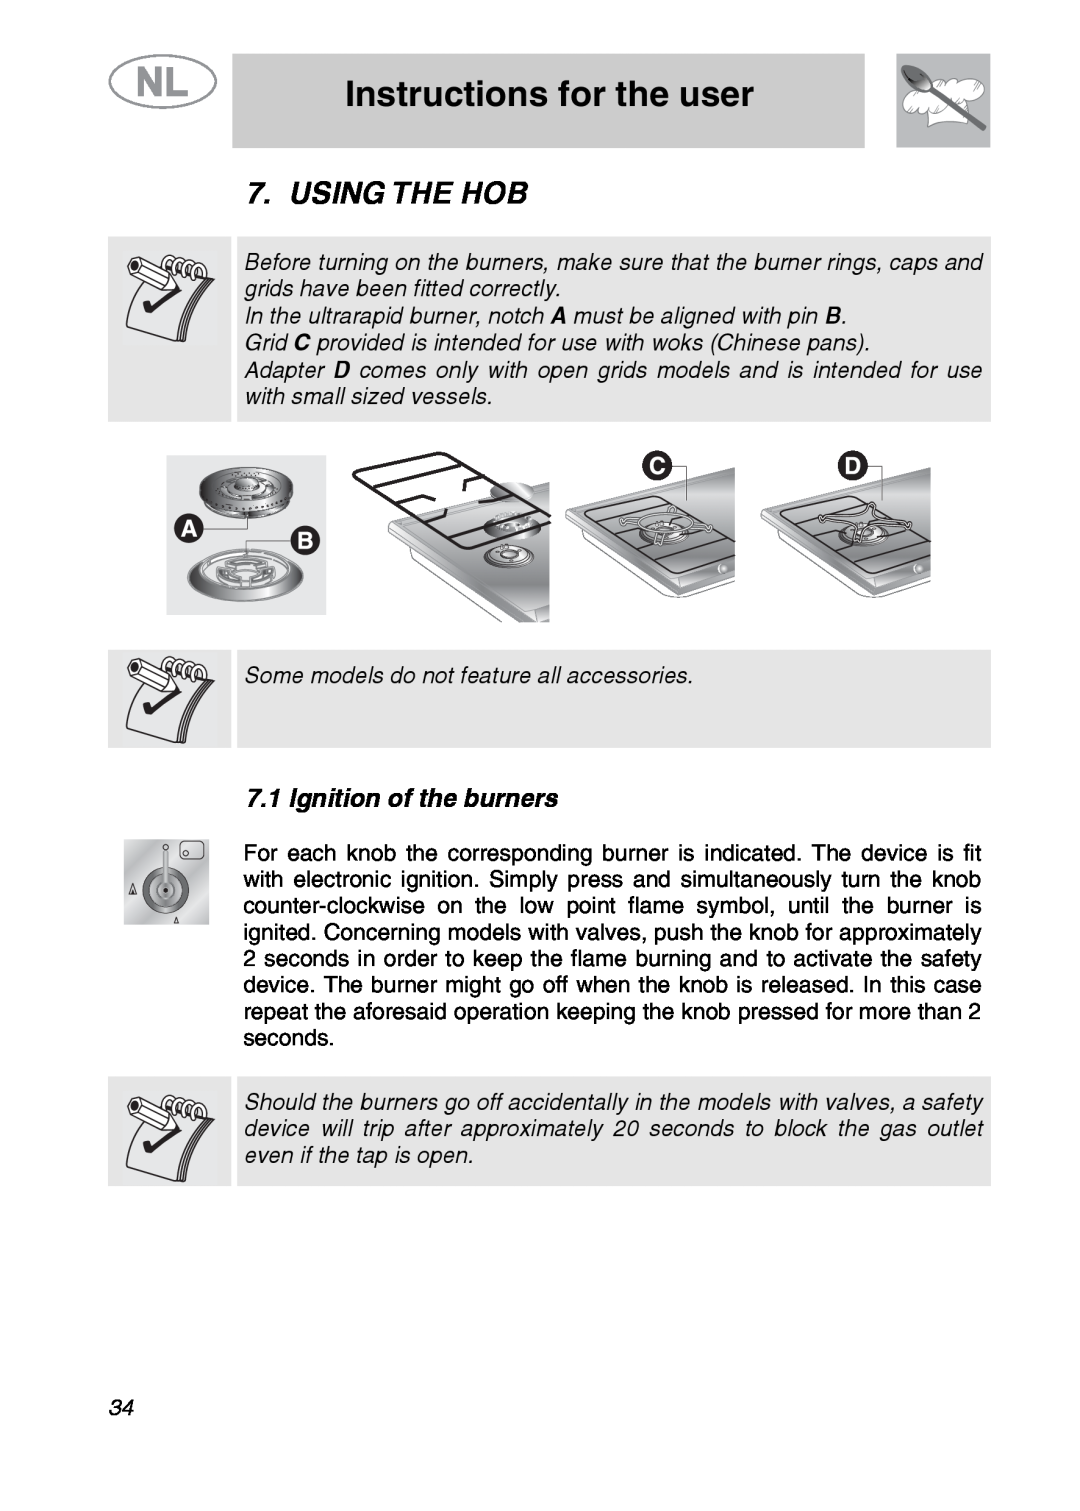 Smeg GKC641-3 manual Instructions for the user, Using The Hob, Ignition of the burners 